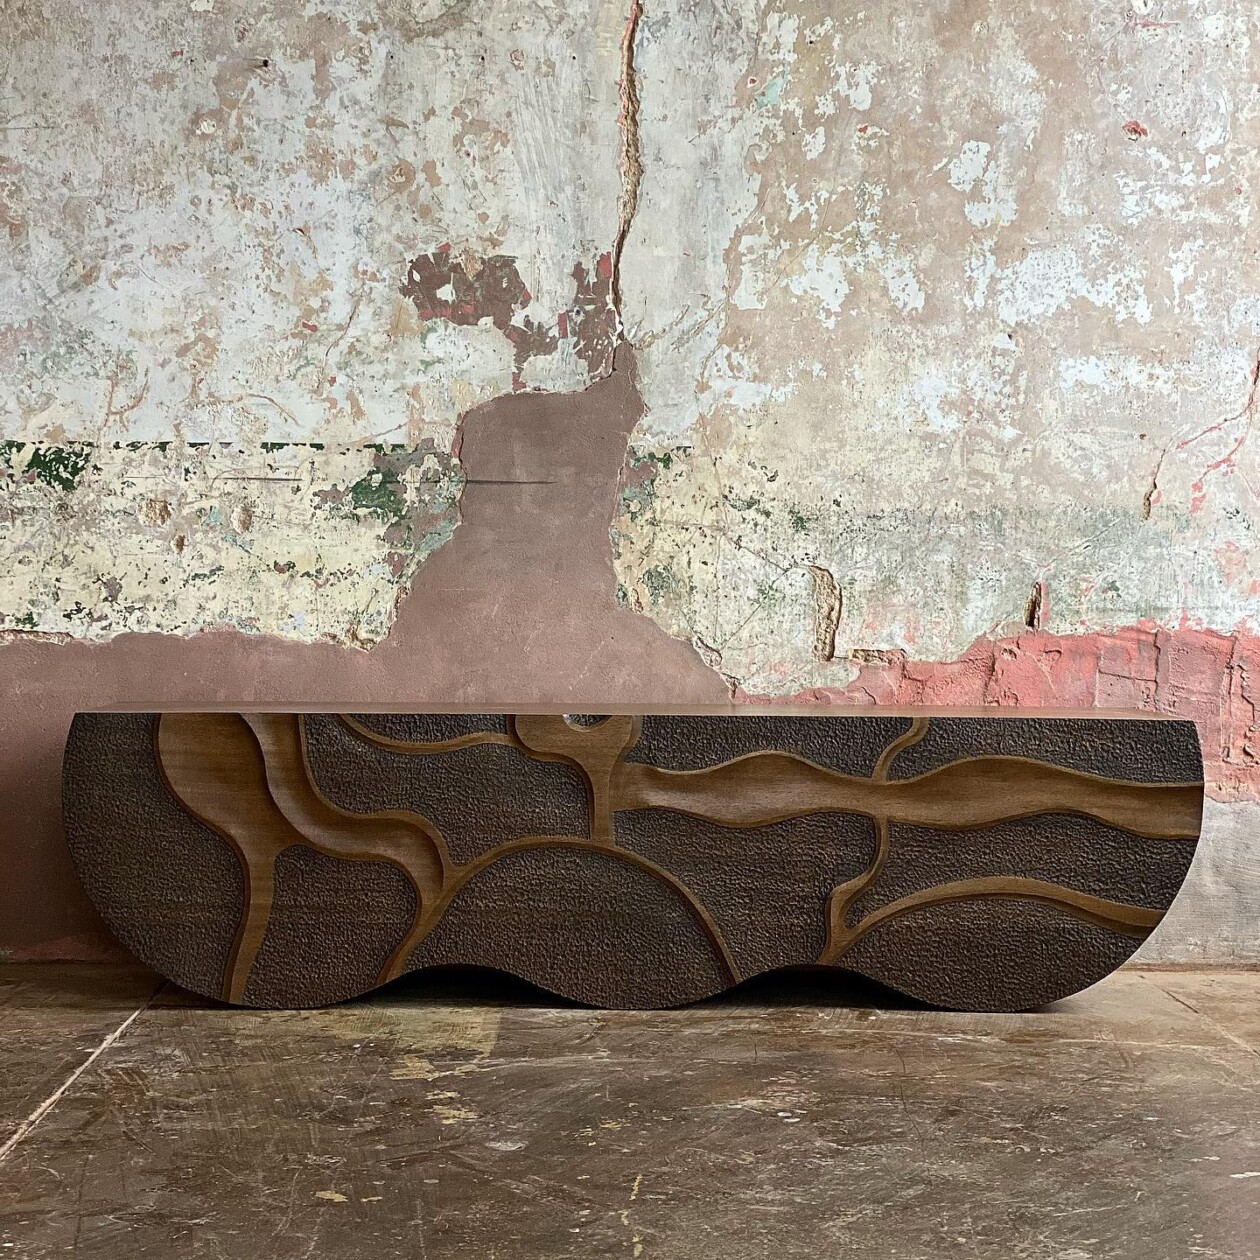 Intricately Engraved And Textured Organic Shaped Furniture By Caleb Woodard (7)